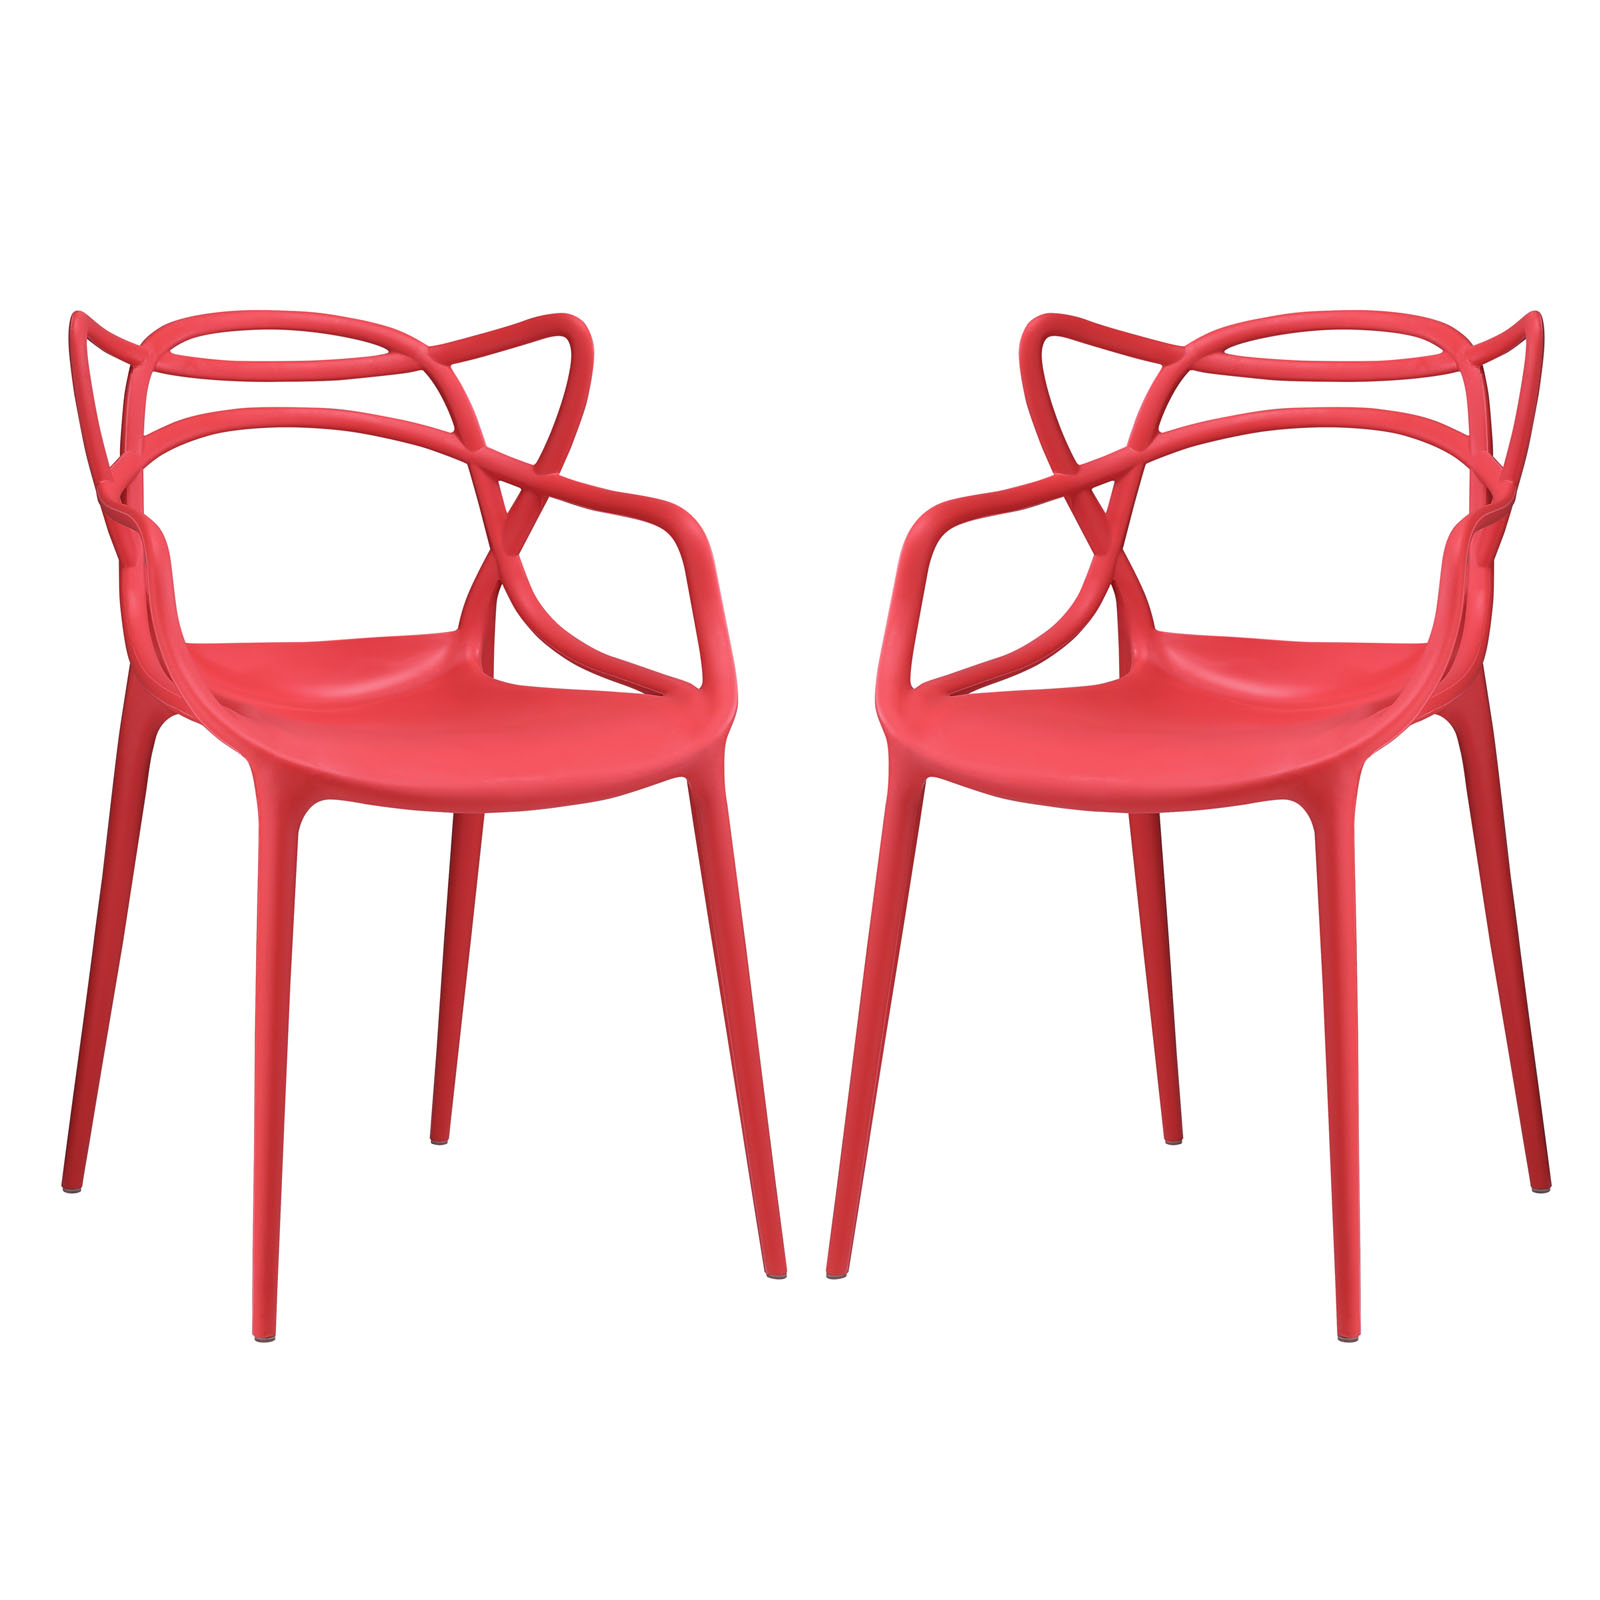 Modern Contemporary Urban Design Outdoor Kitchen Room Dining Chair Set ( Set of Two), Red, Plastic - image 1 of 4